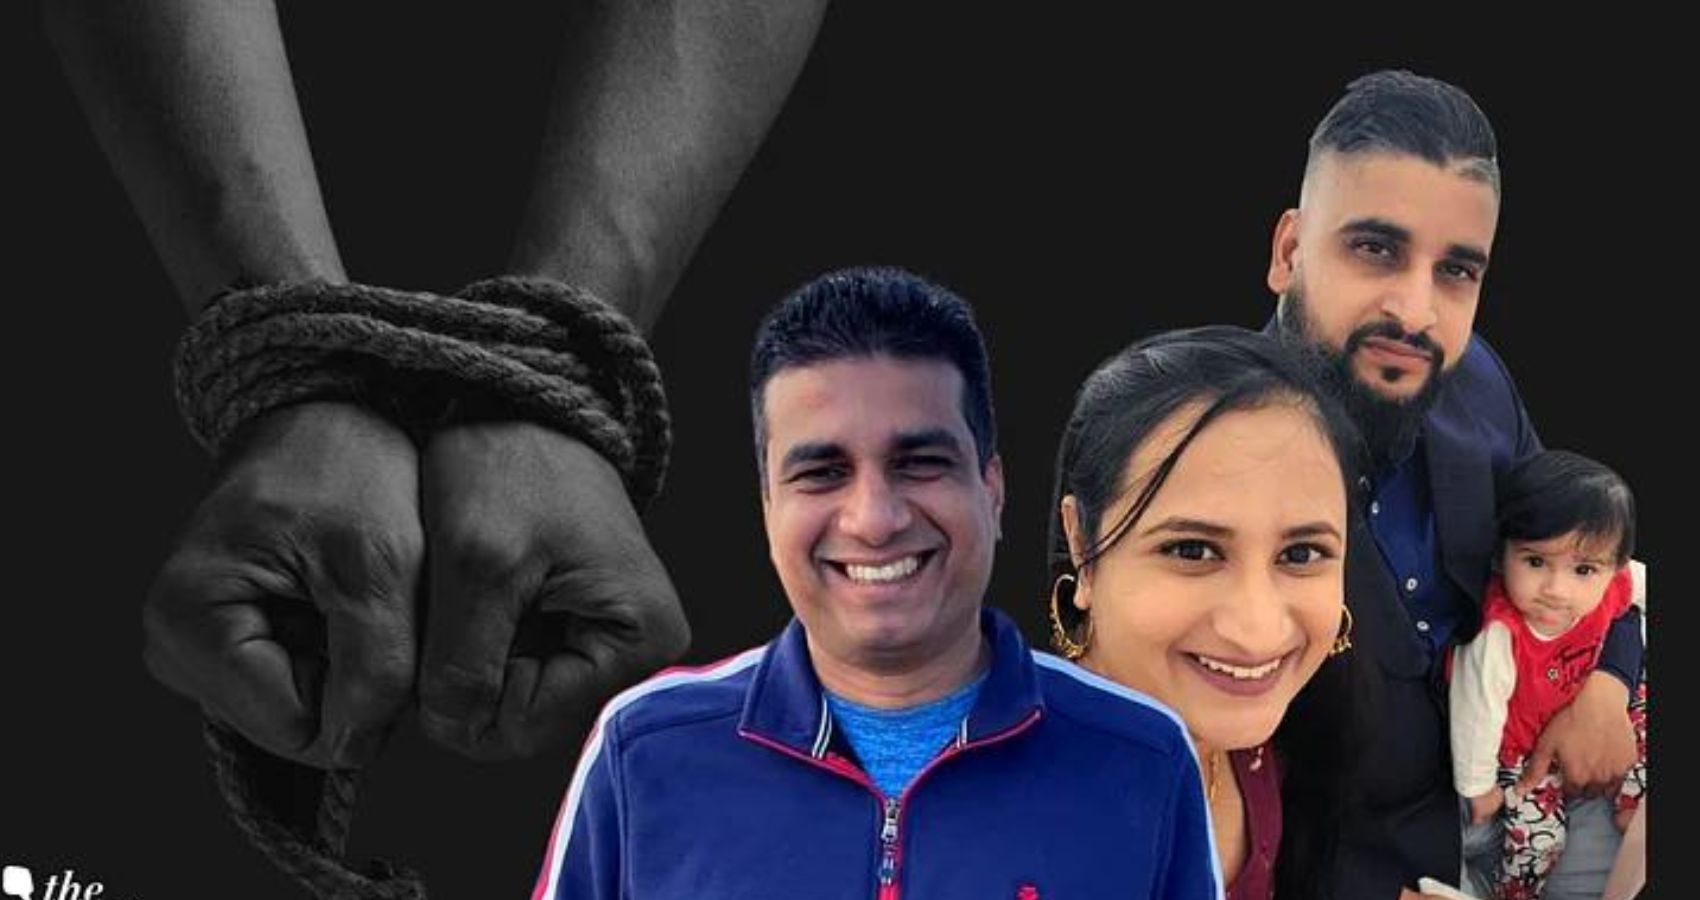 Shattering the American Dream, 4 Members Of An NRI Family Kidnapped And Killed